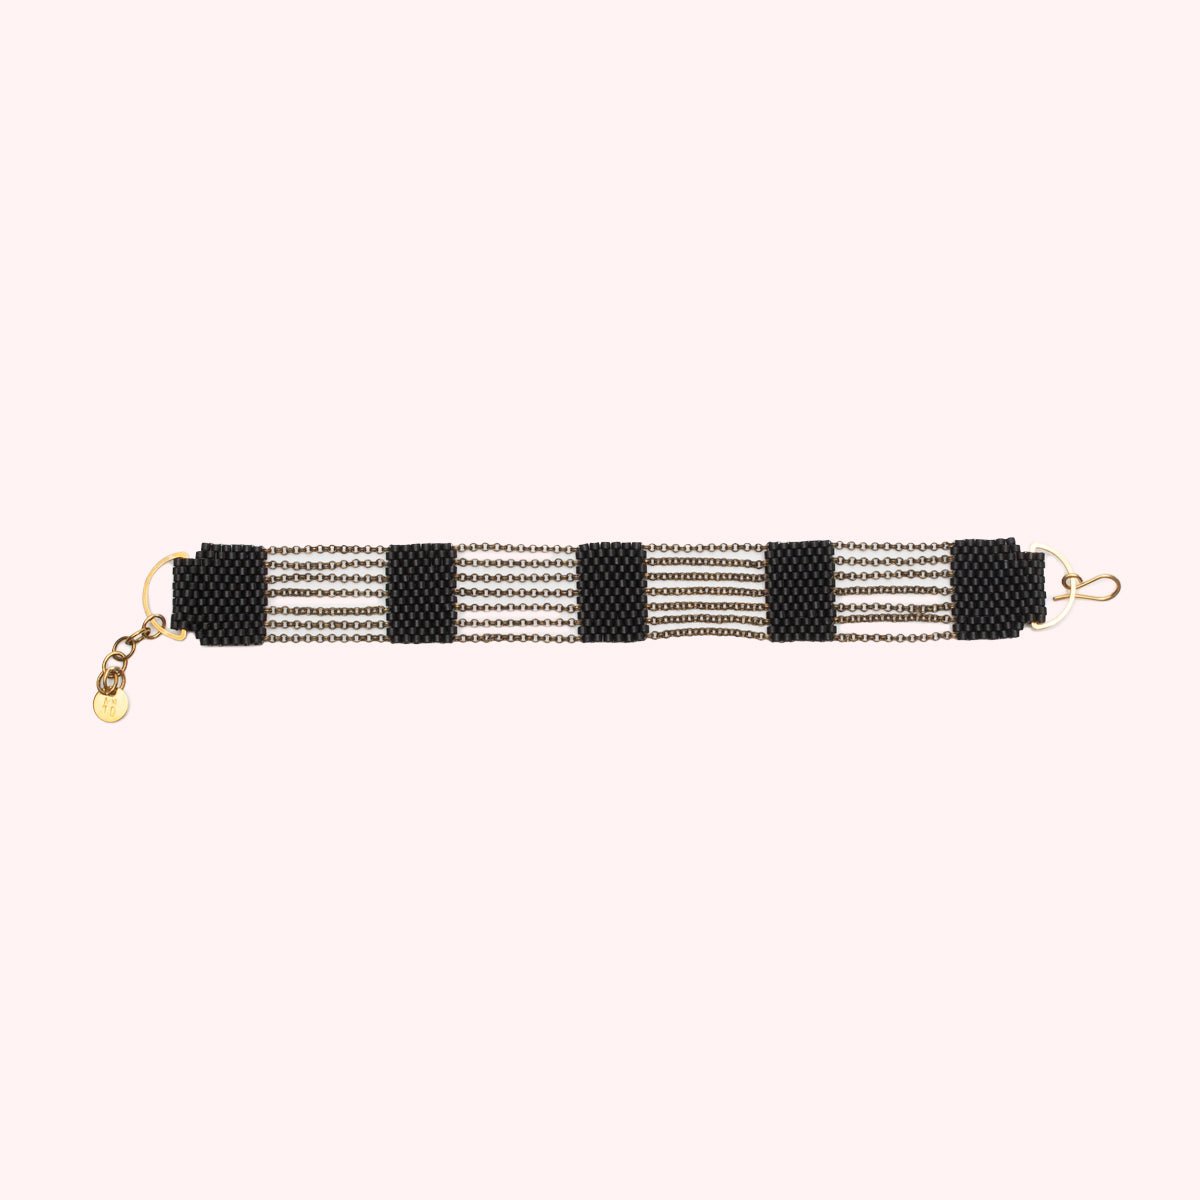 A 5 tier beaded bracelet made with black beads and antique brass chains. Handmade by A Nod To Design in Portland. OR.